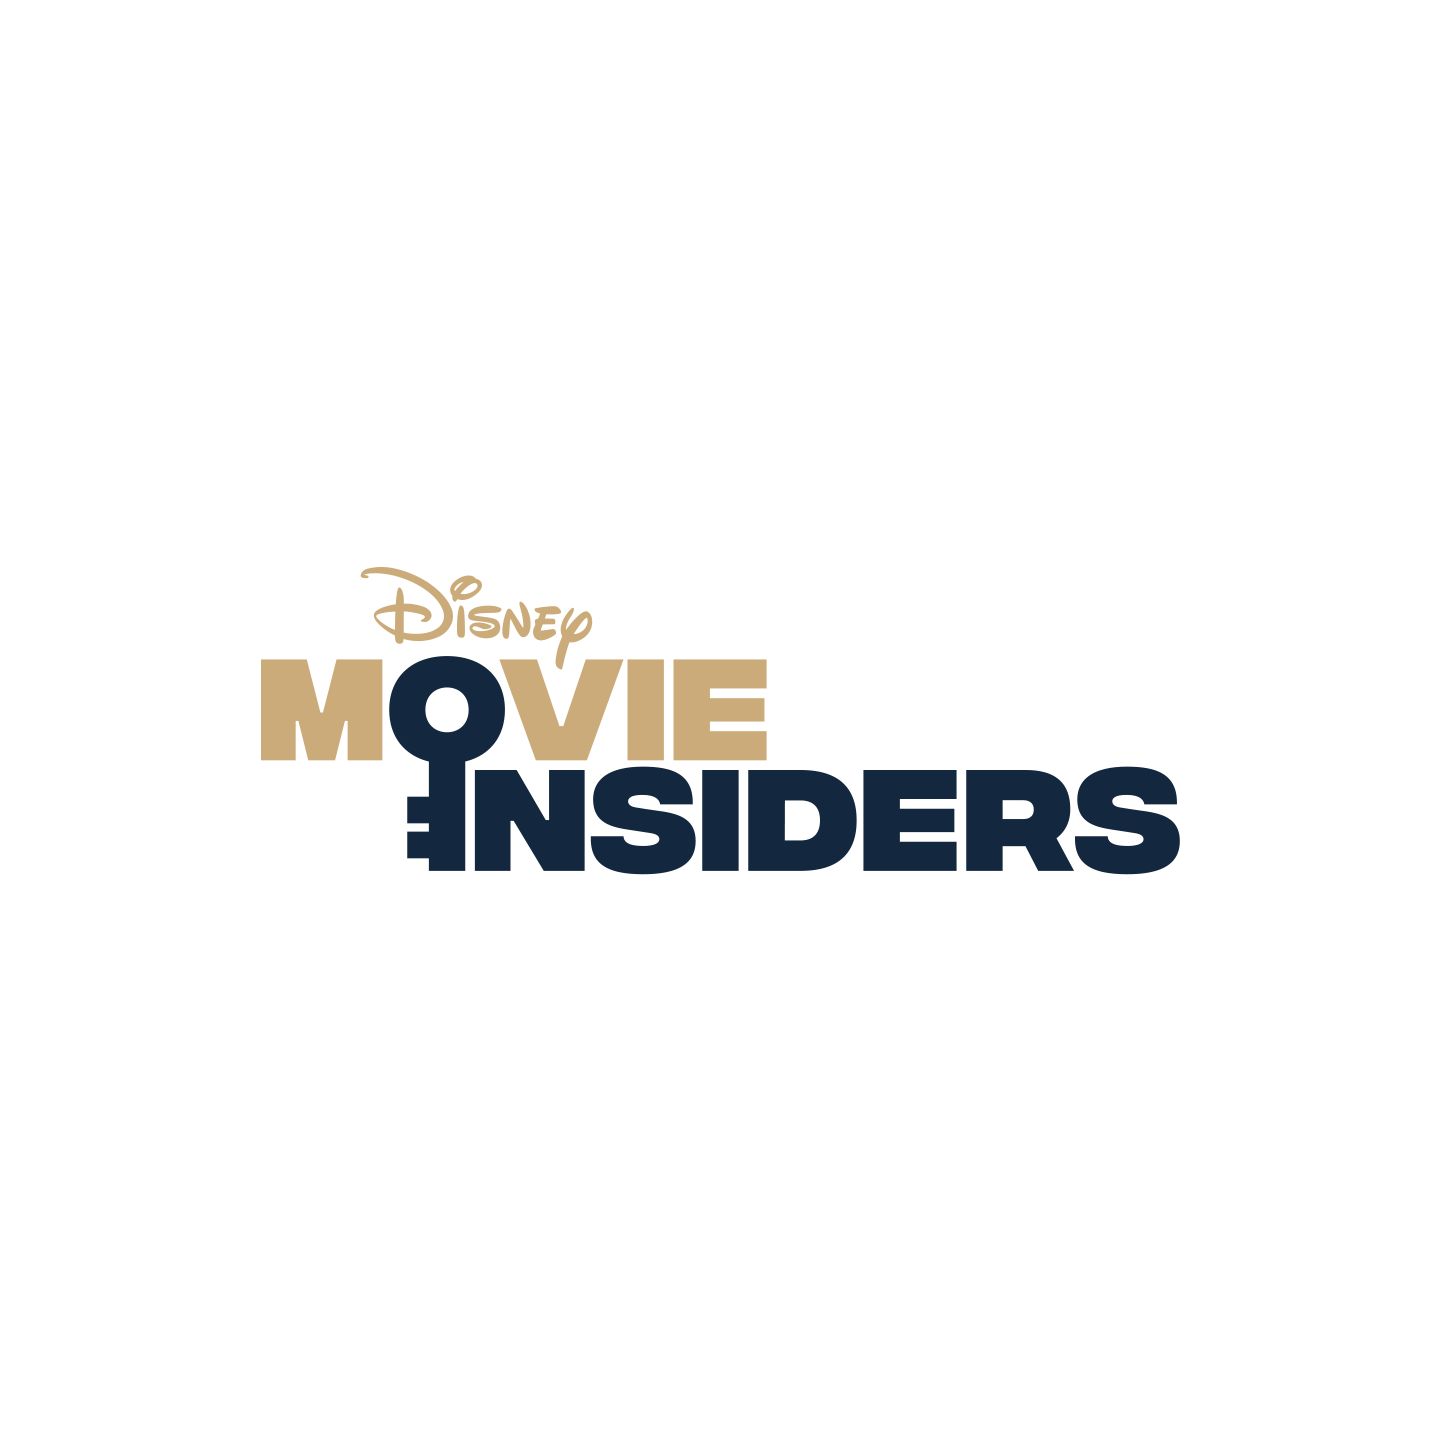 Disney Movie Insiders Presents The Insider 5 Featuring | Live at the Lightyear Opening Night Fan Event | LISTEN NOW